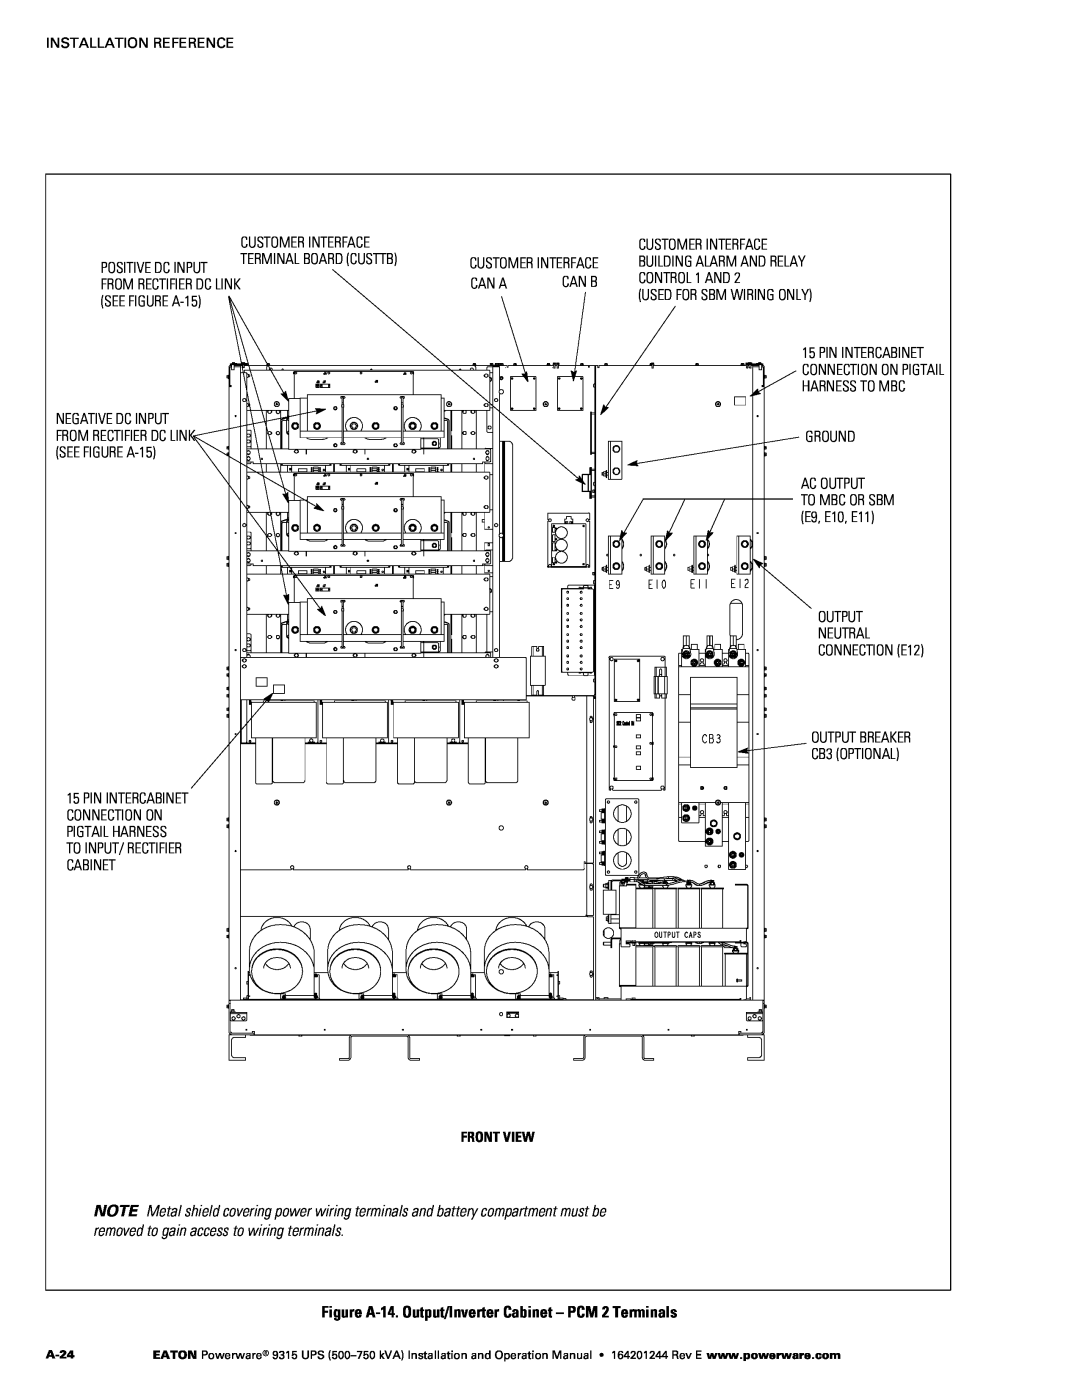 Powerware Powerware 9315 operation manual Figure A‐14. Output/Inverter Cabinet - PCM 2 Terminals, Front View, A-24 